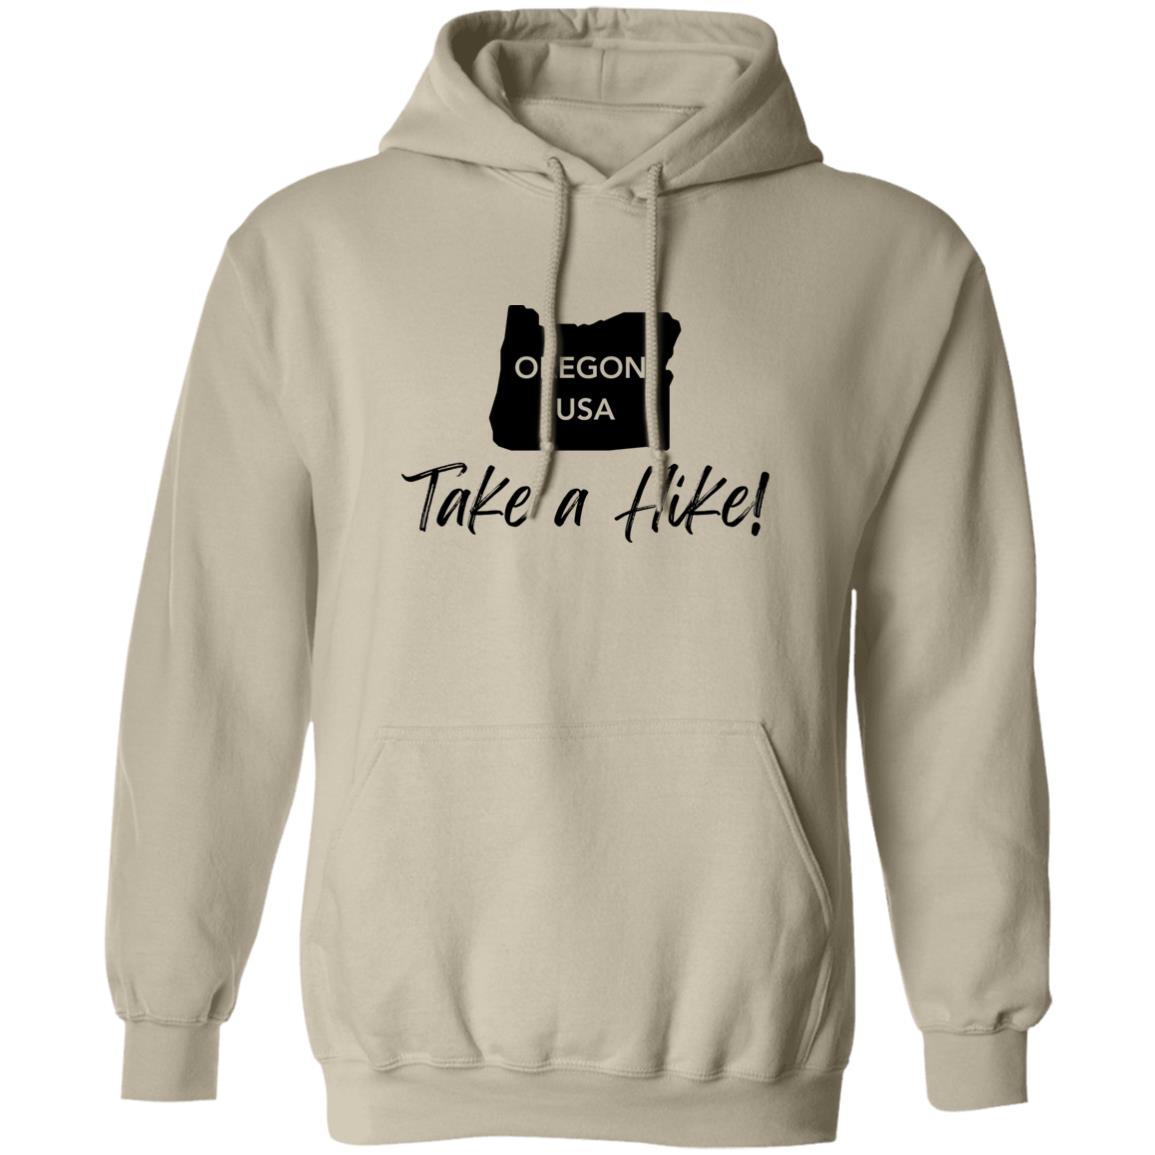 Comfy G185 Pullover Hoodie for men or women - Take a Hike Oregon black print